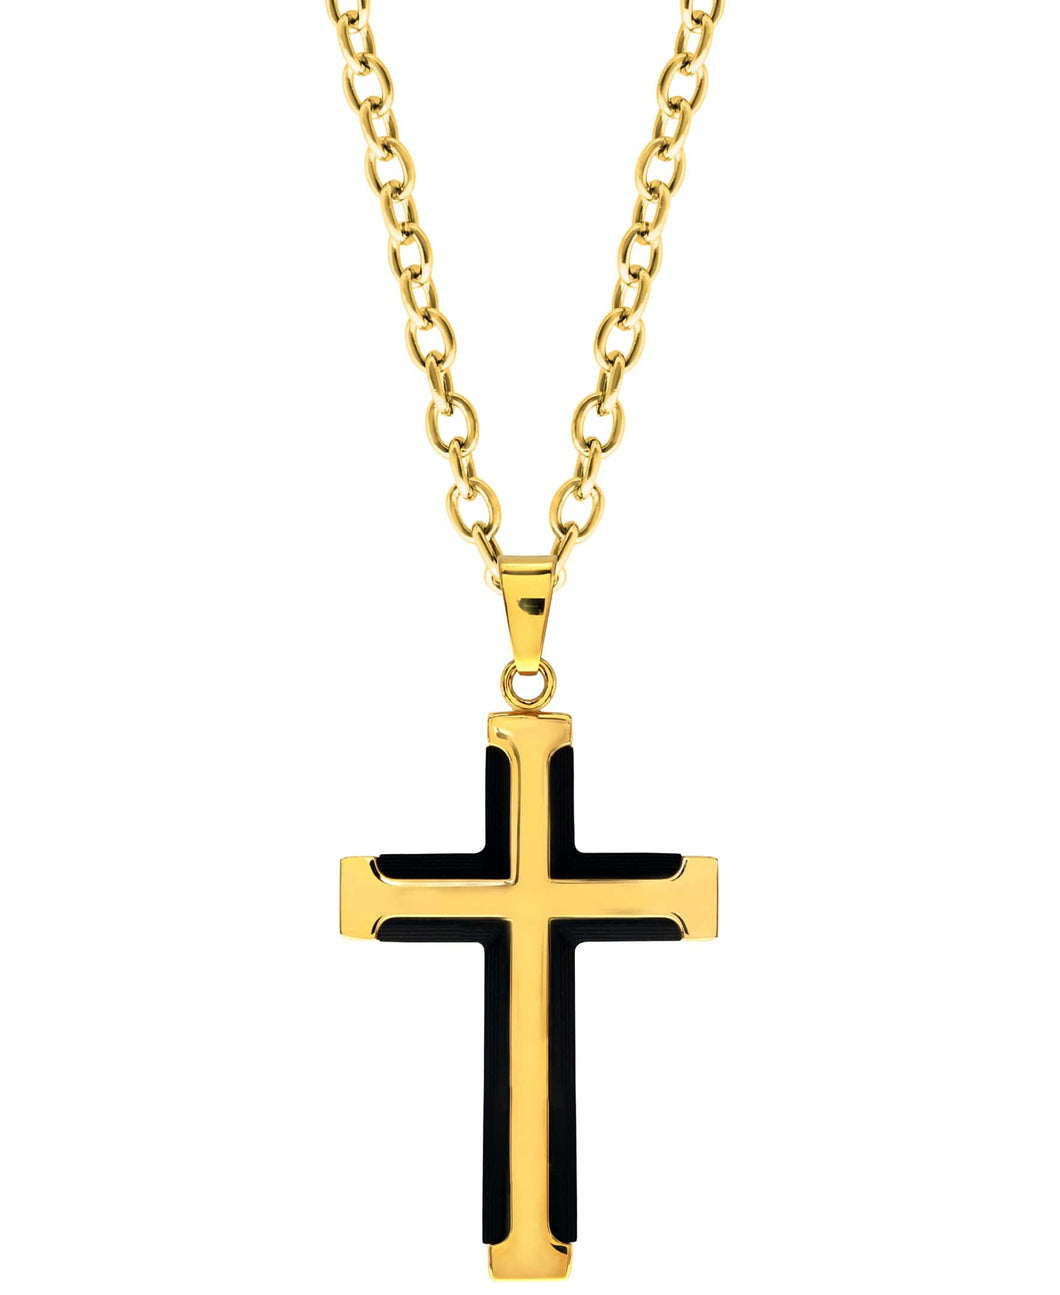 Sutton Carbon Fiber and Gold-Tone Stainless Steel Cross Pendant Necklace